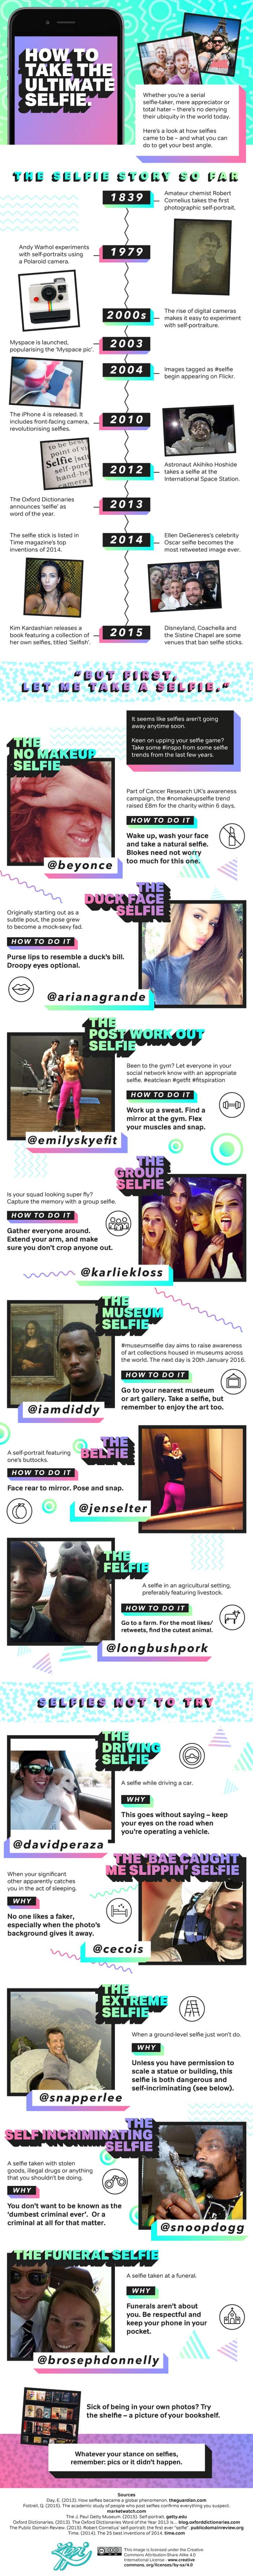 how-to-take-the-ultimate-selfie-infographic